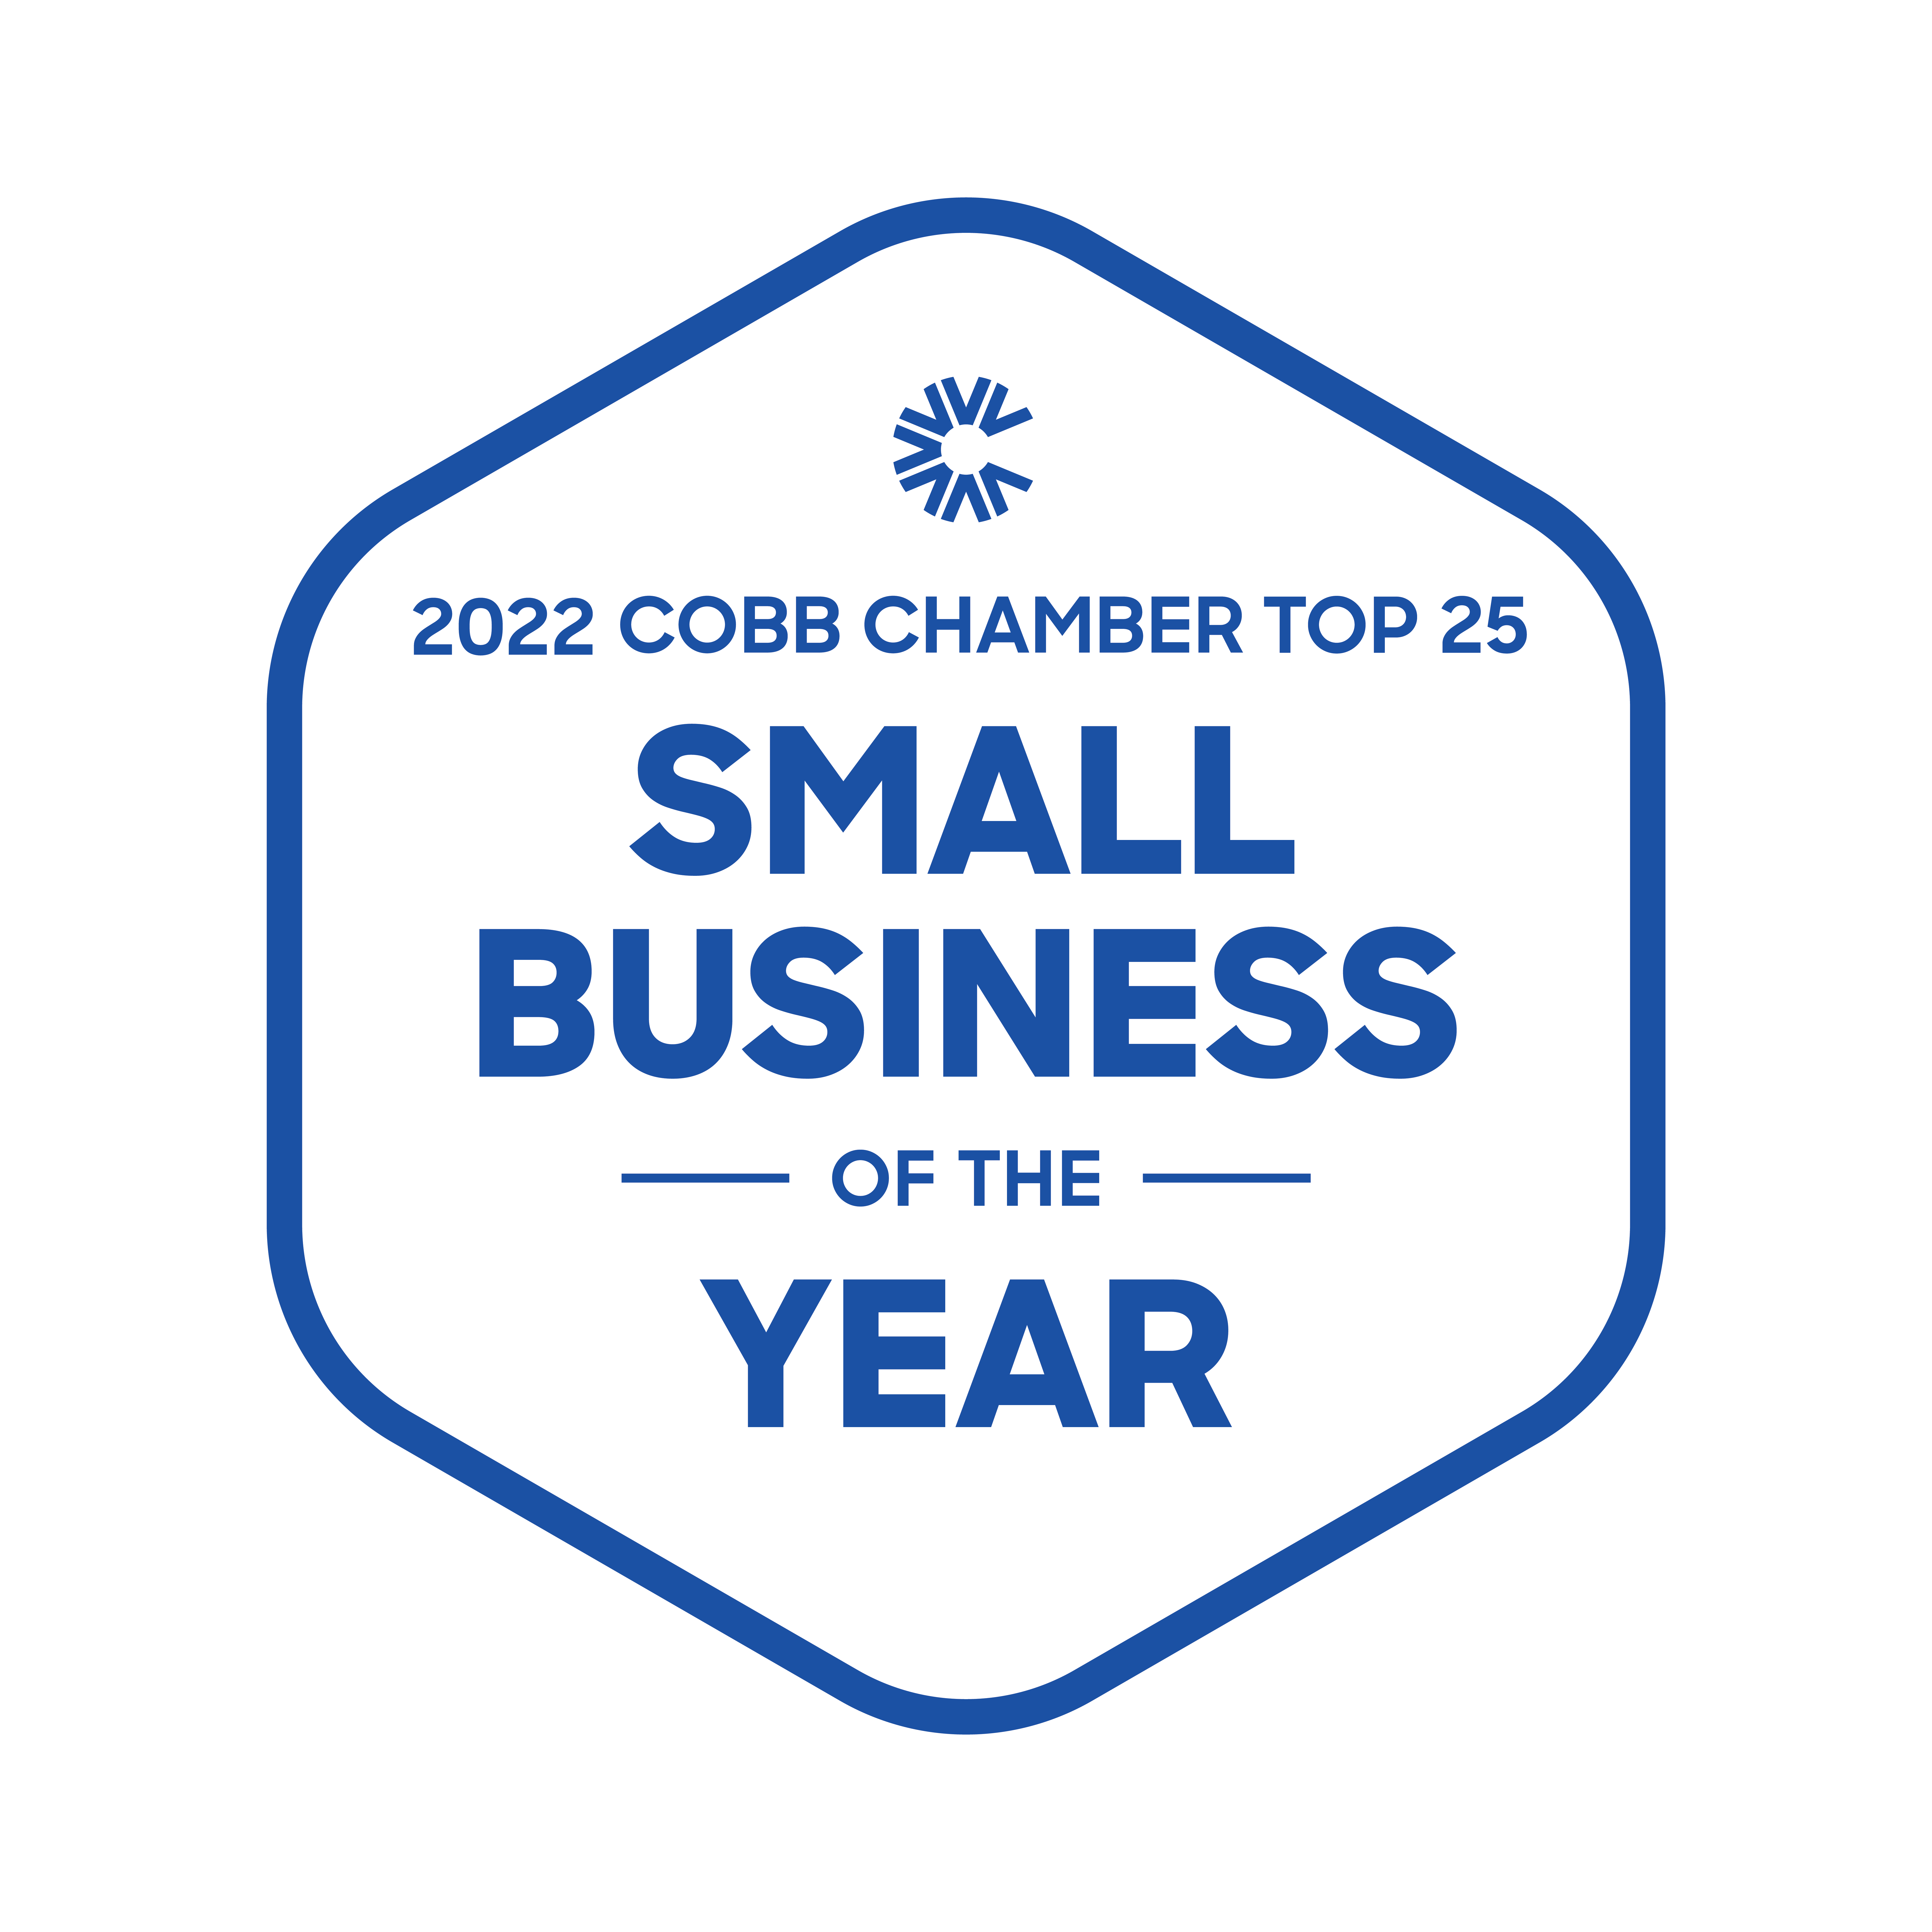 2022 Cobb Chamber Top 25 Small Business of the Year